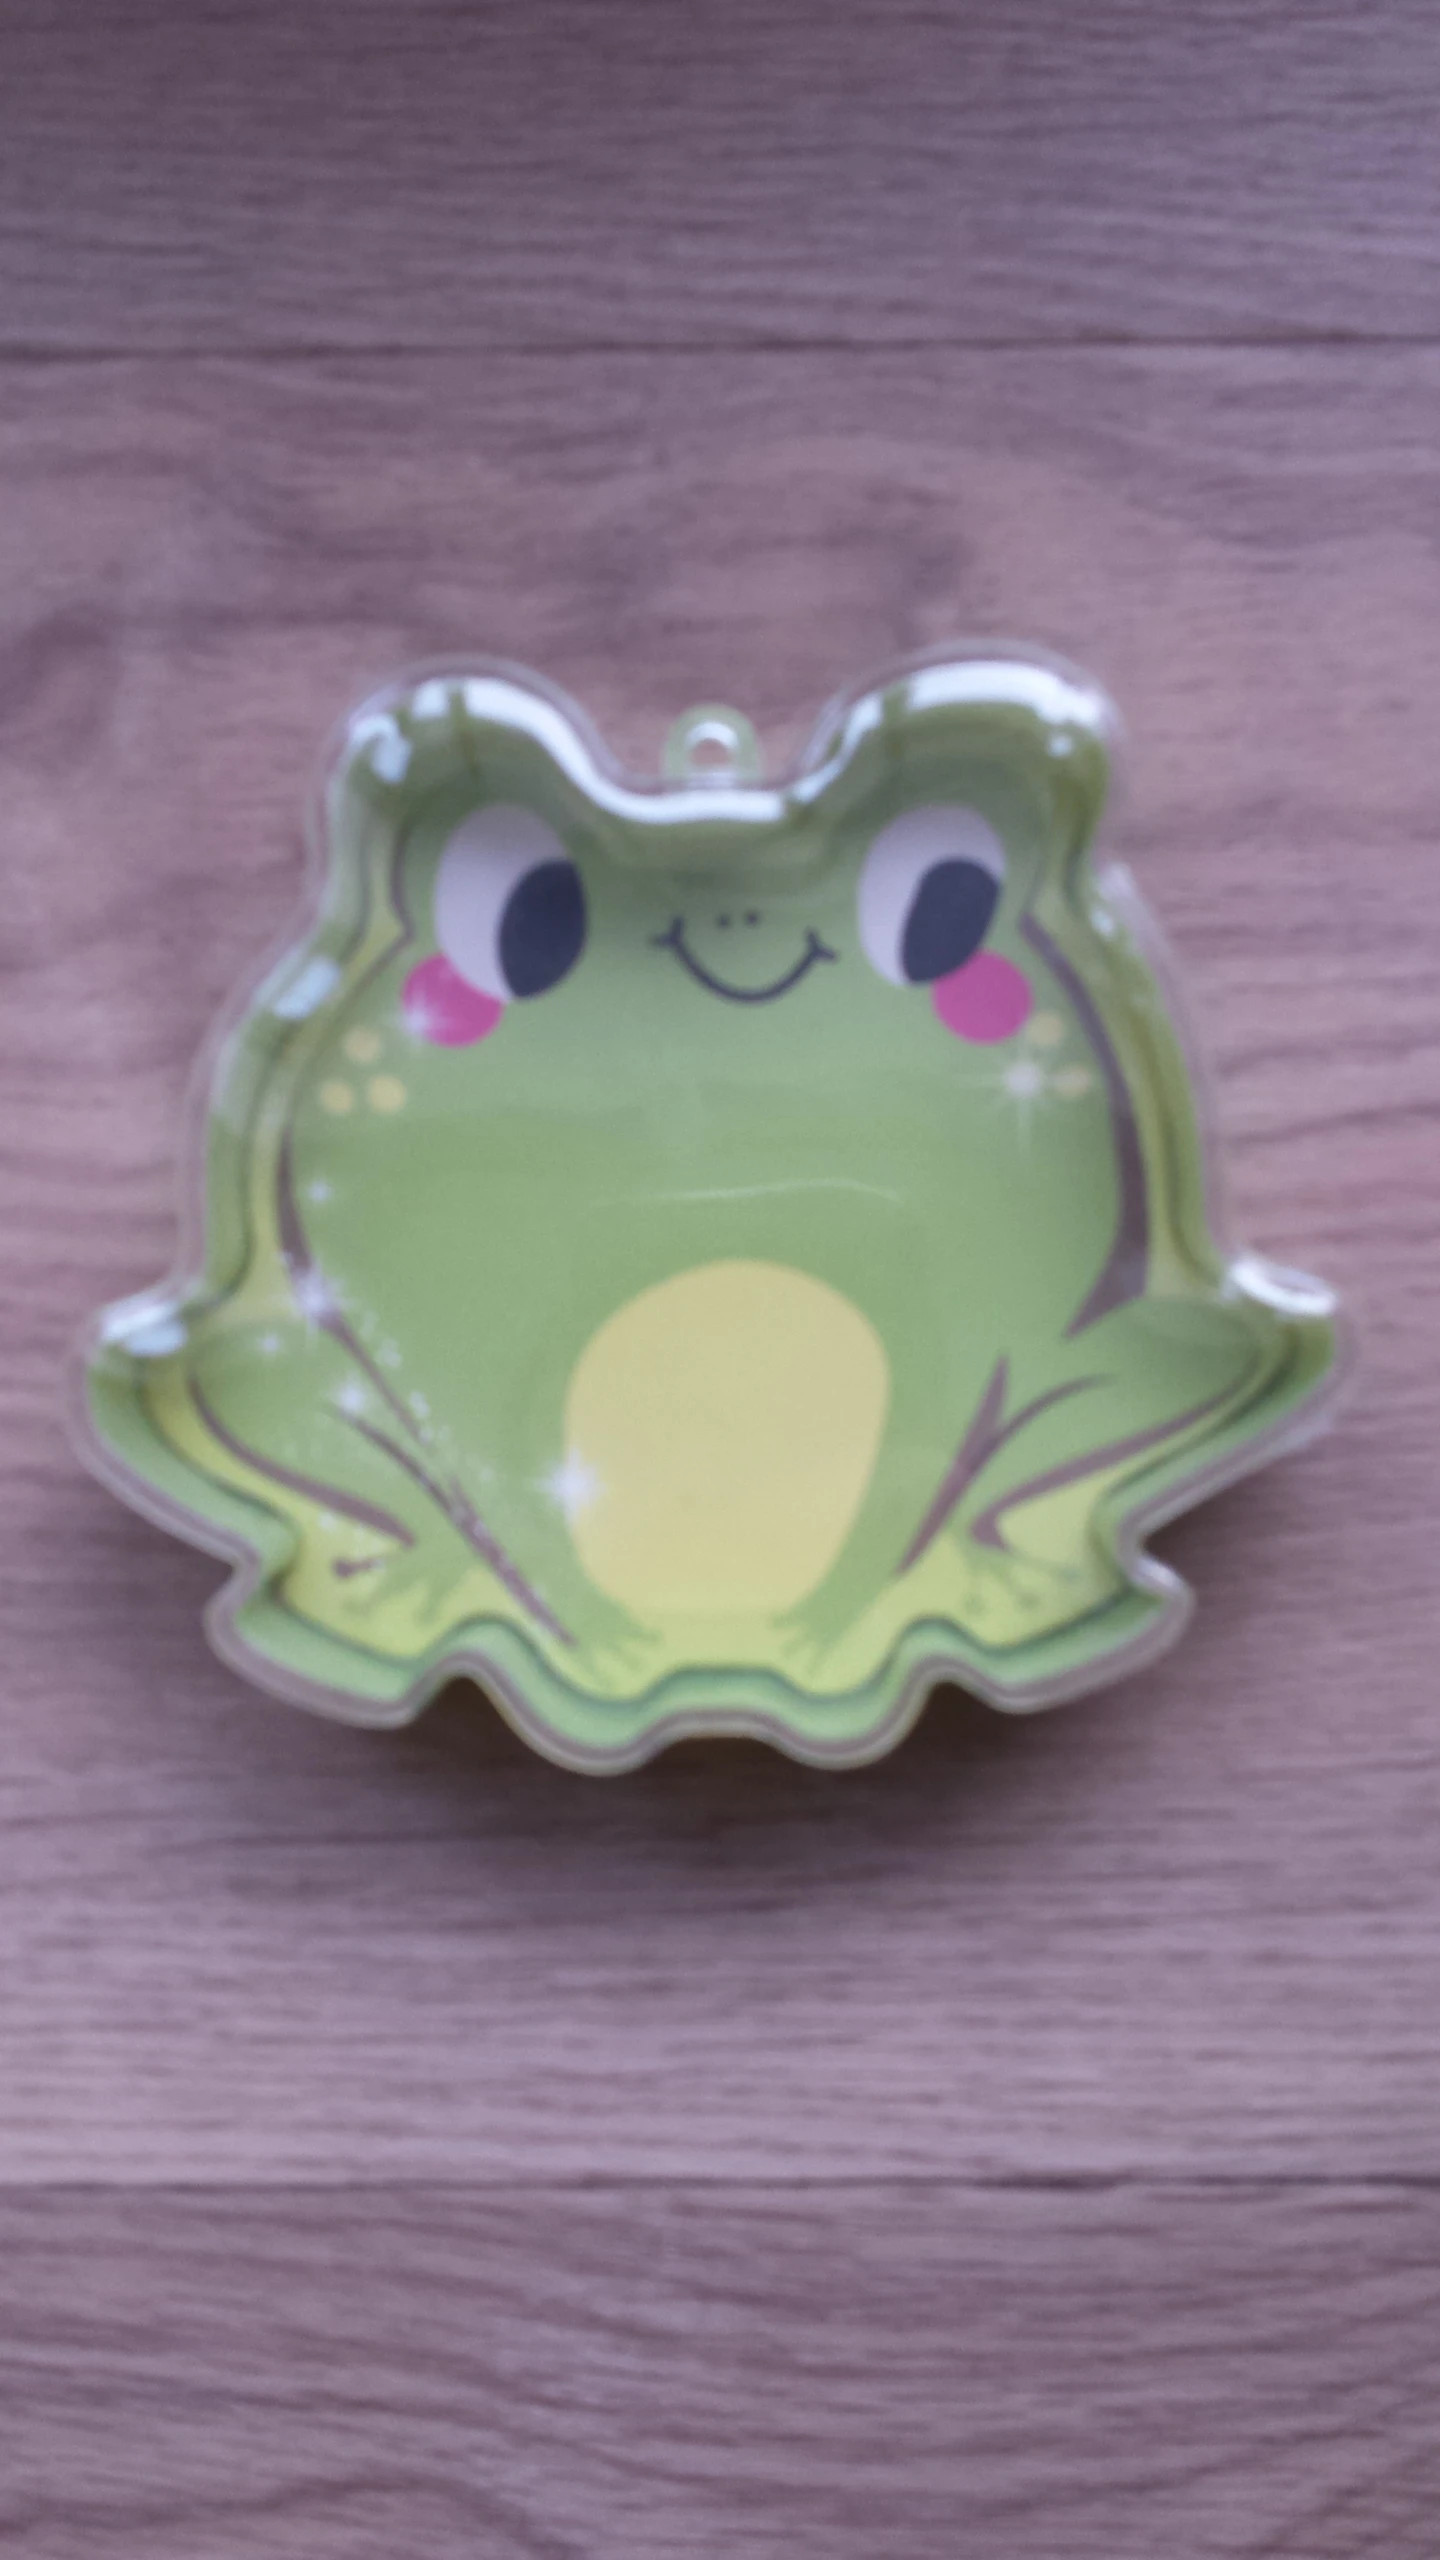 plastic frog shaped container with lid